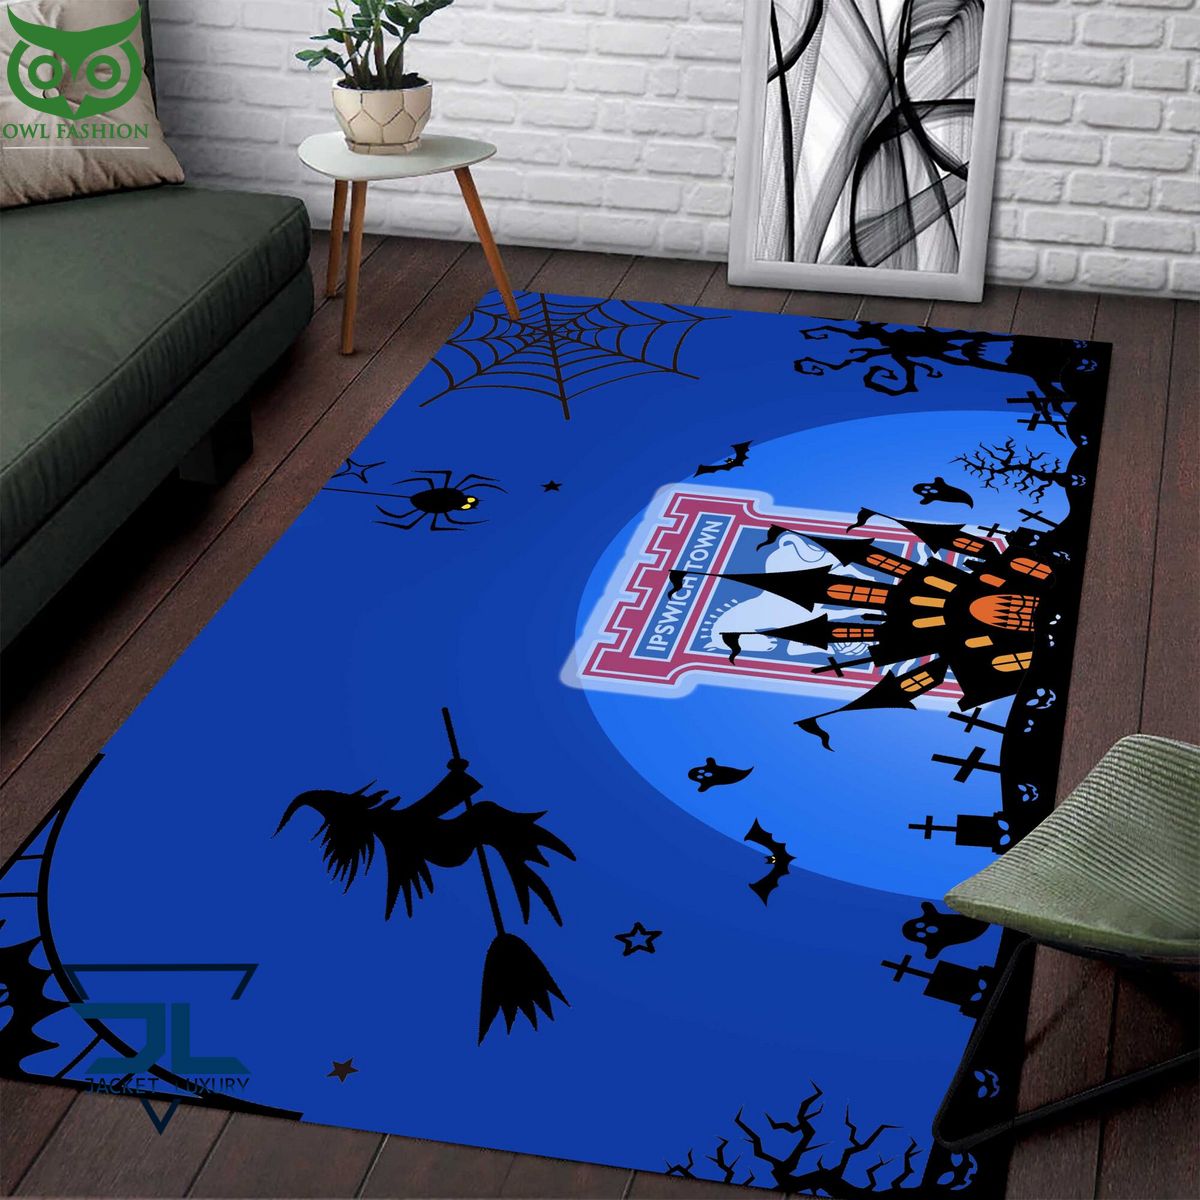 Ipswich Town F.C EFL New Carpet Rug The overall aesthetics are top notch.